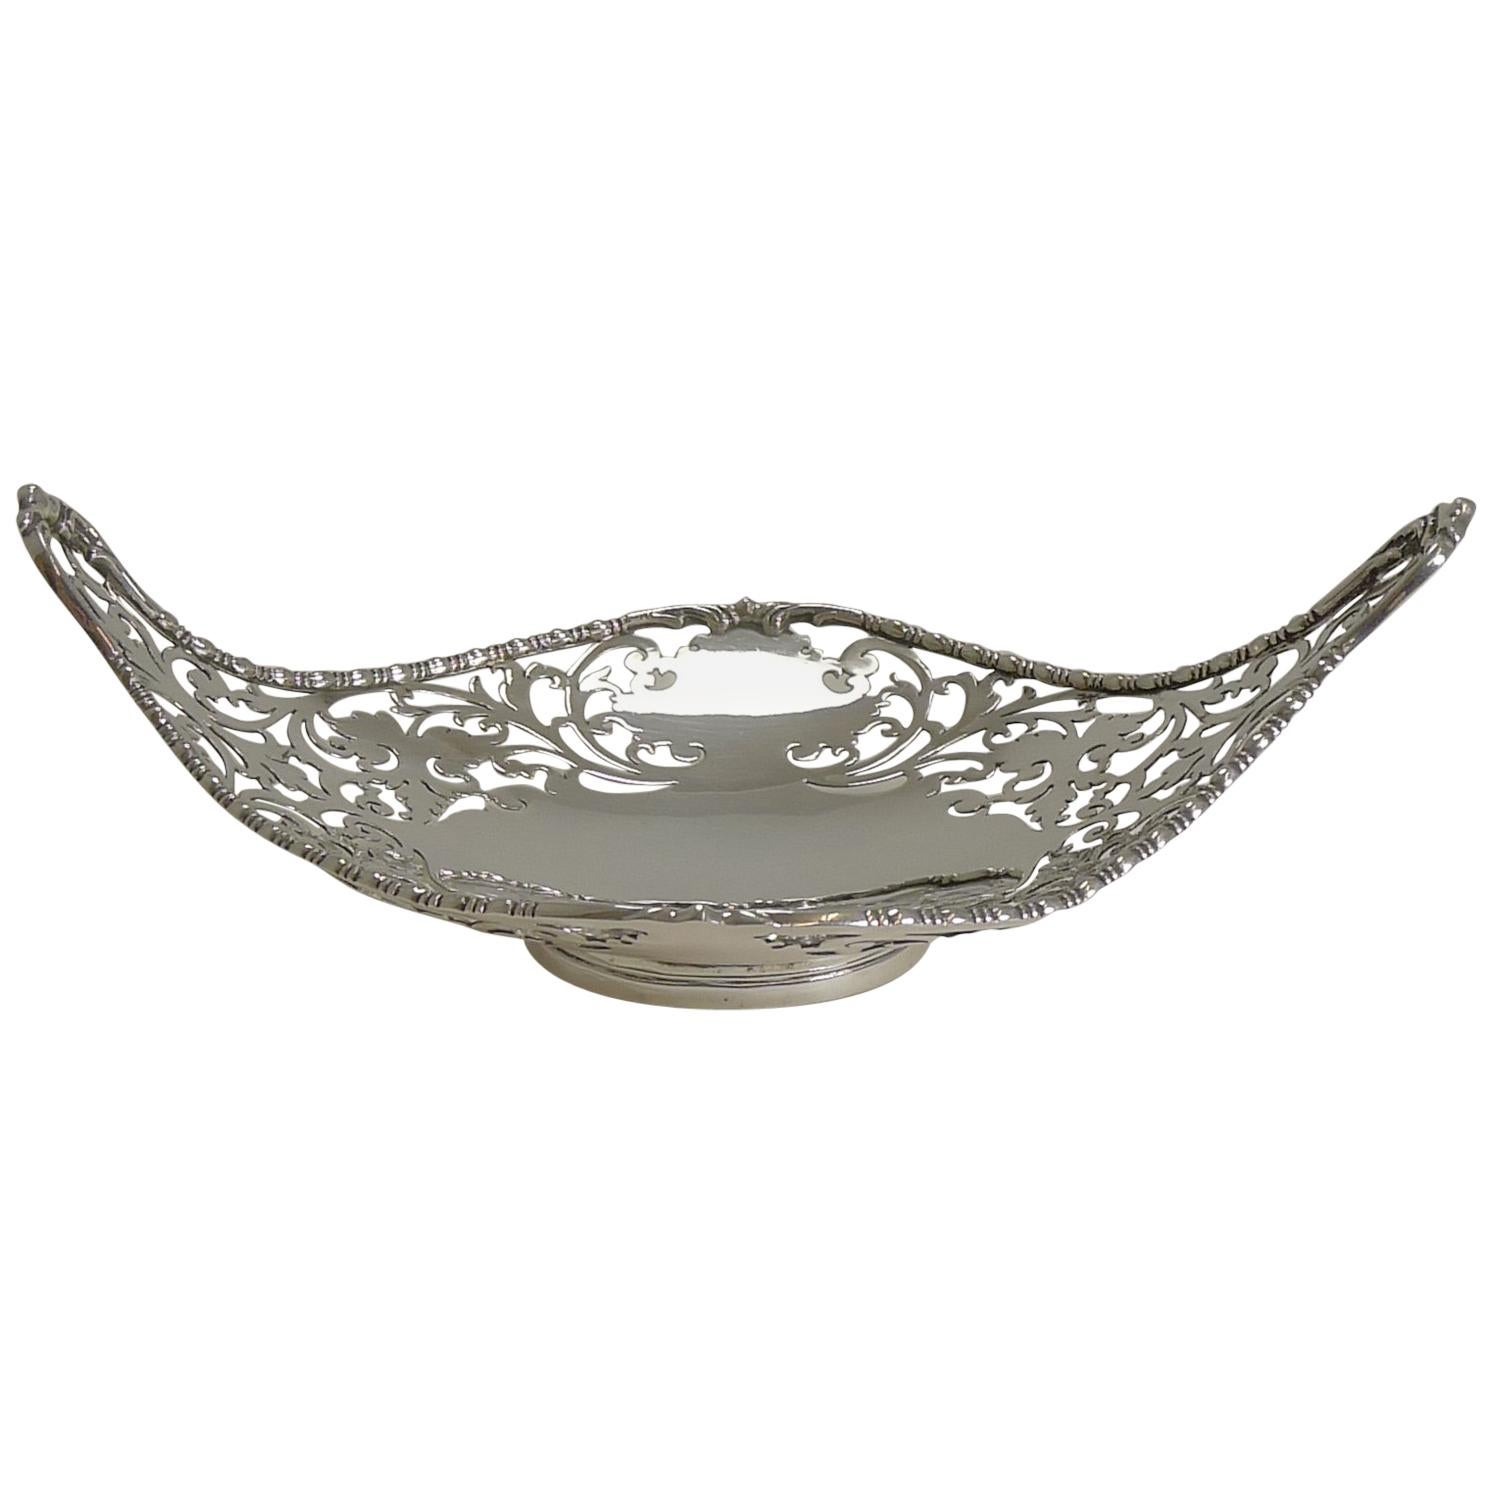 Antique English Sterling Silver Basket or Dish, 1908